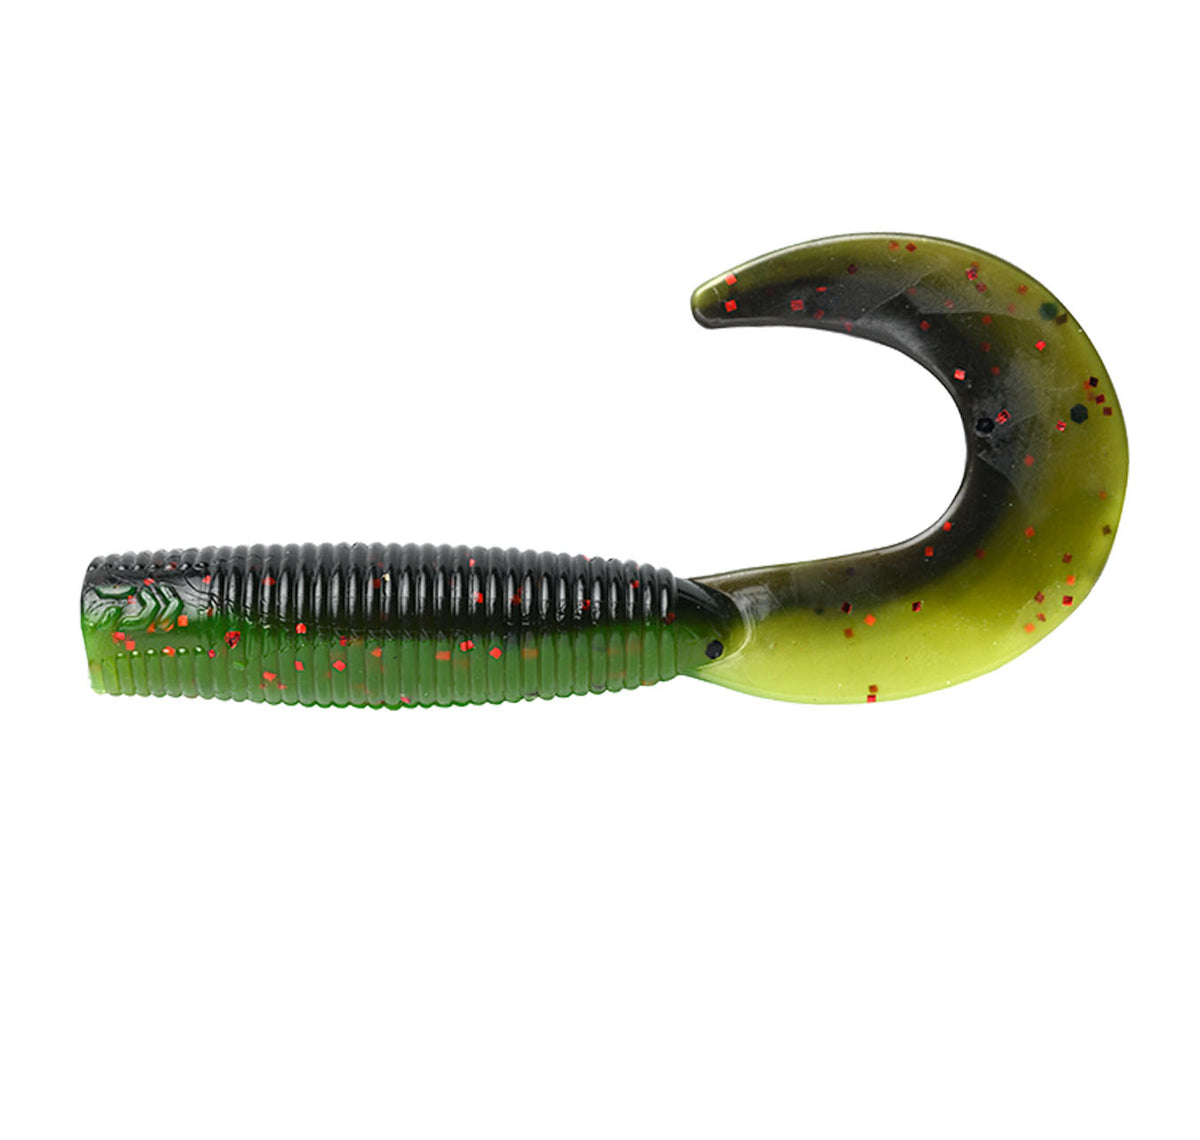 Grubs are more than just jigging lures